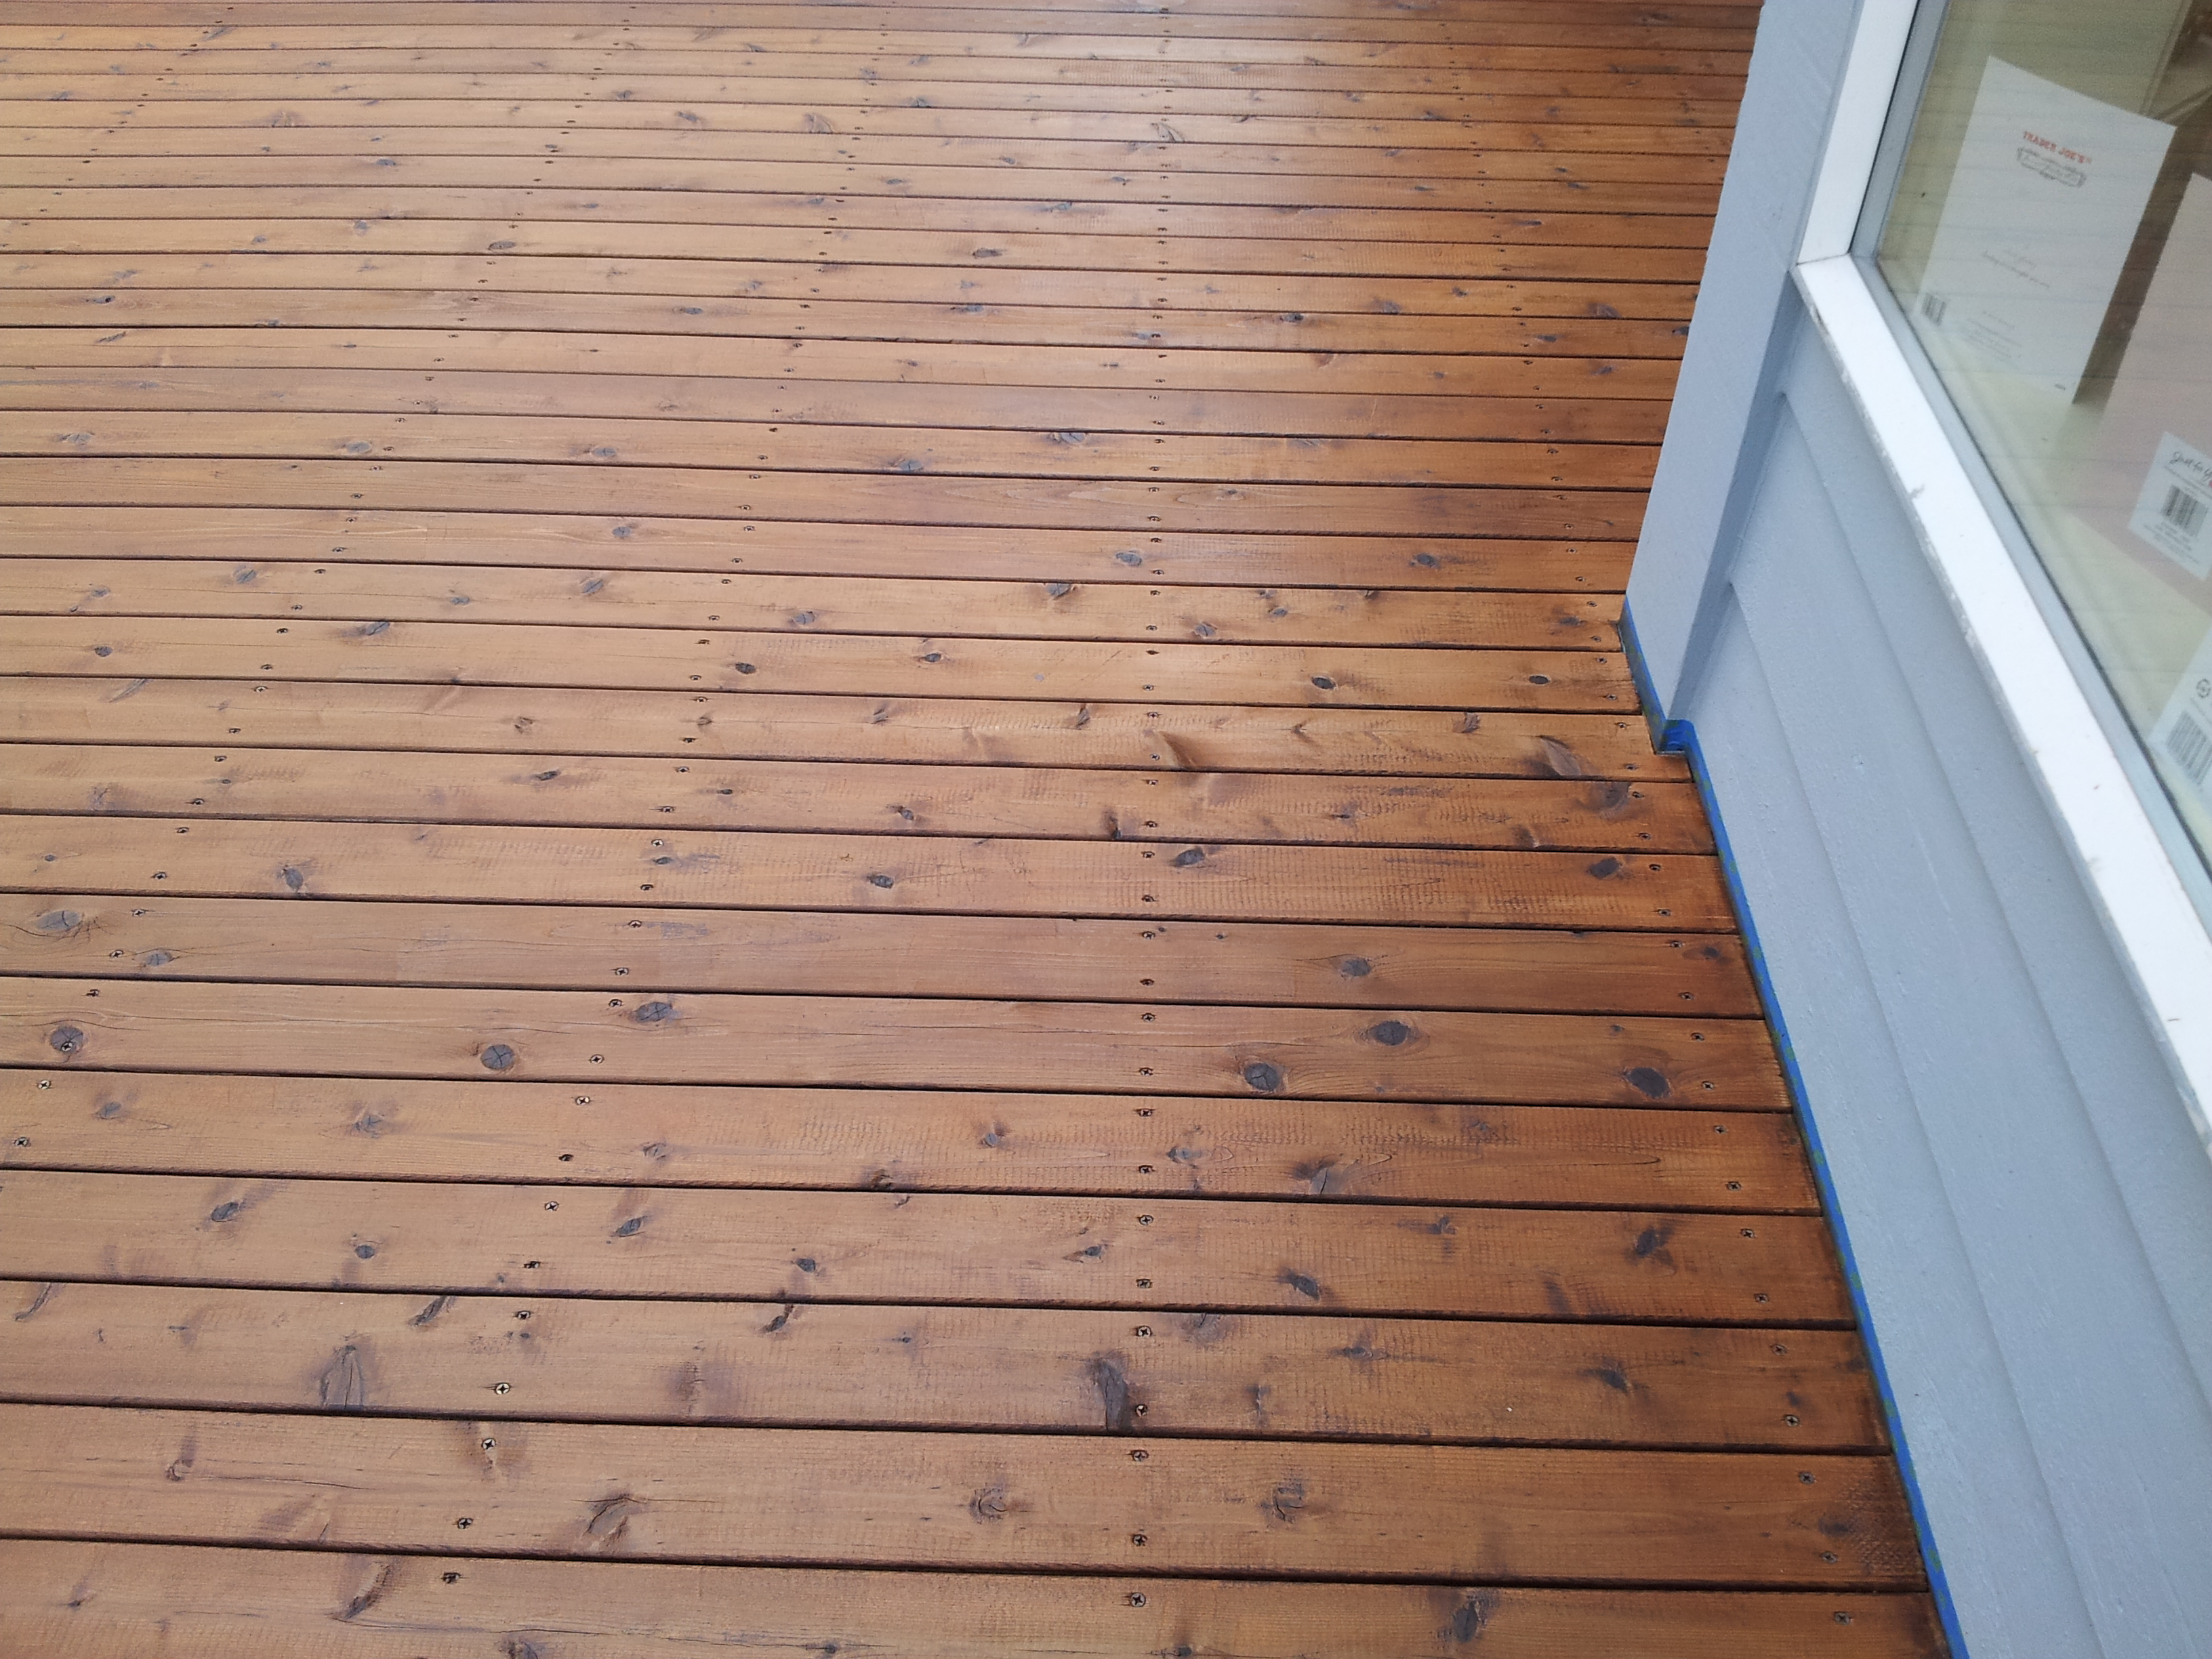 Oil Based Deck Stains 2019 Best Deck Stain Reviews Ratings in measurements 3264 X 2448